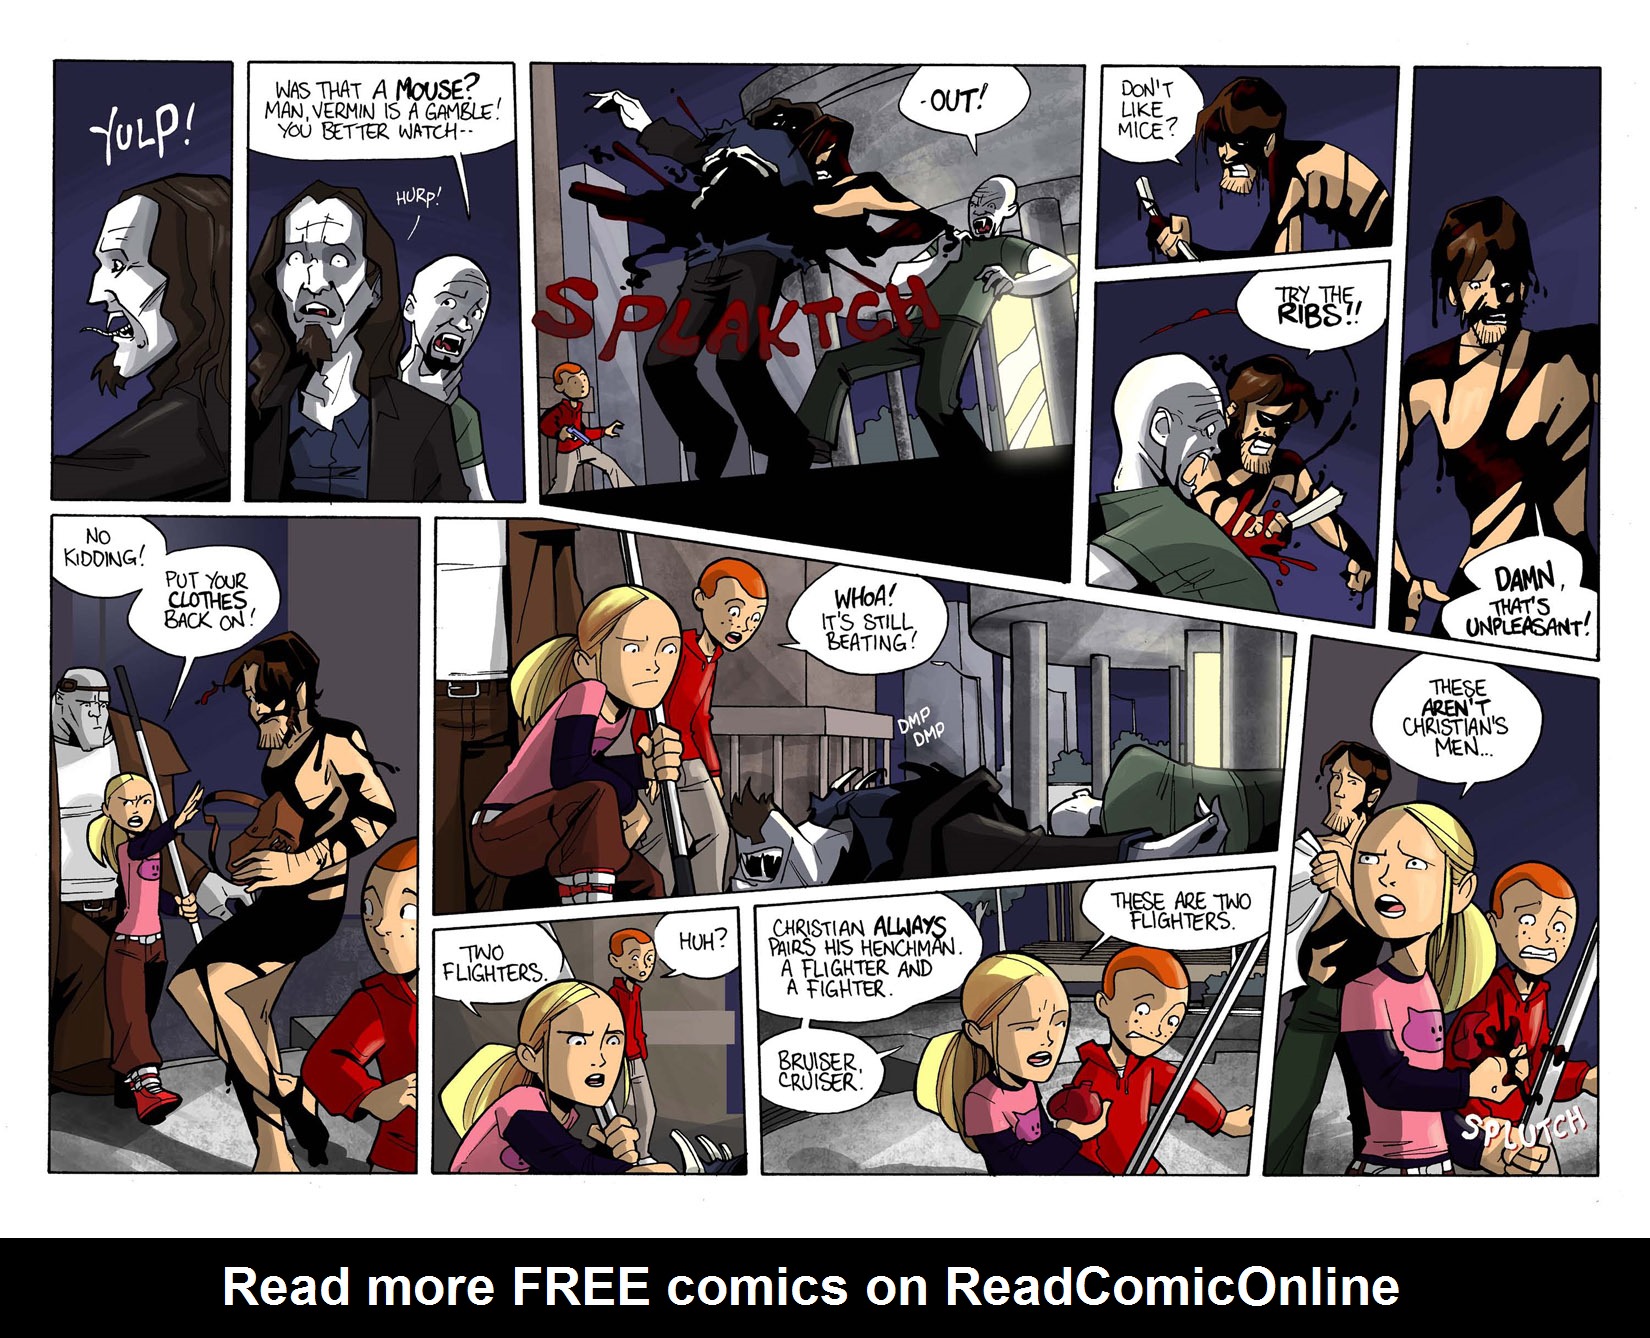 Read online Celadore comic -  Issue #2 - 15